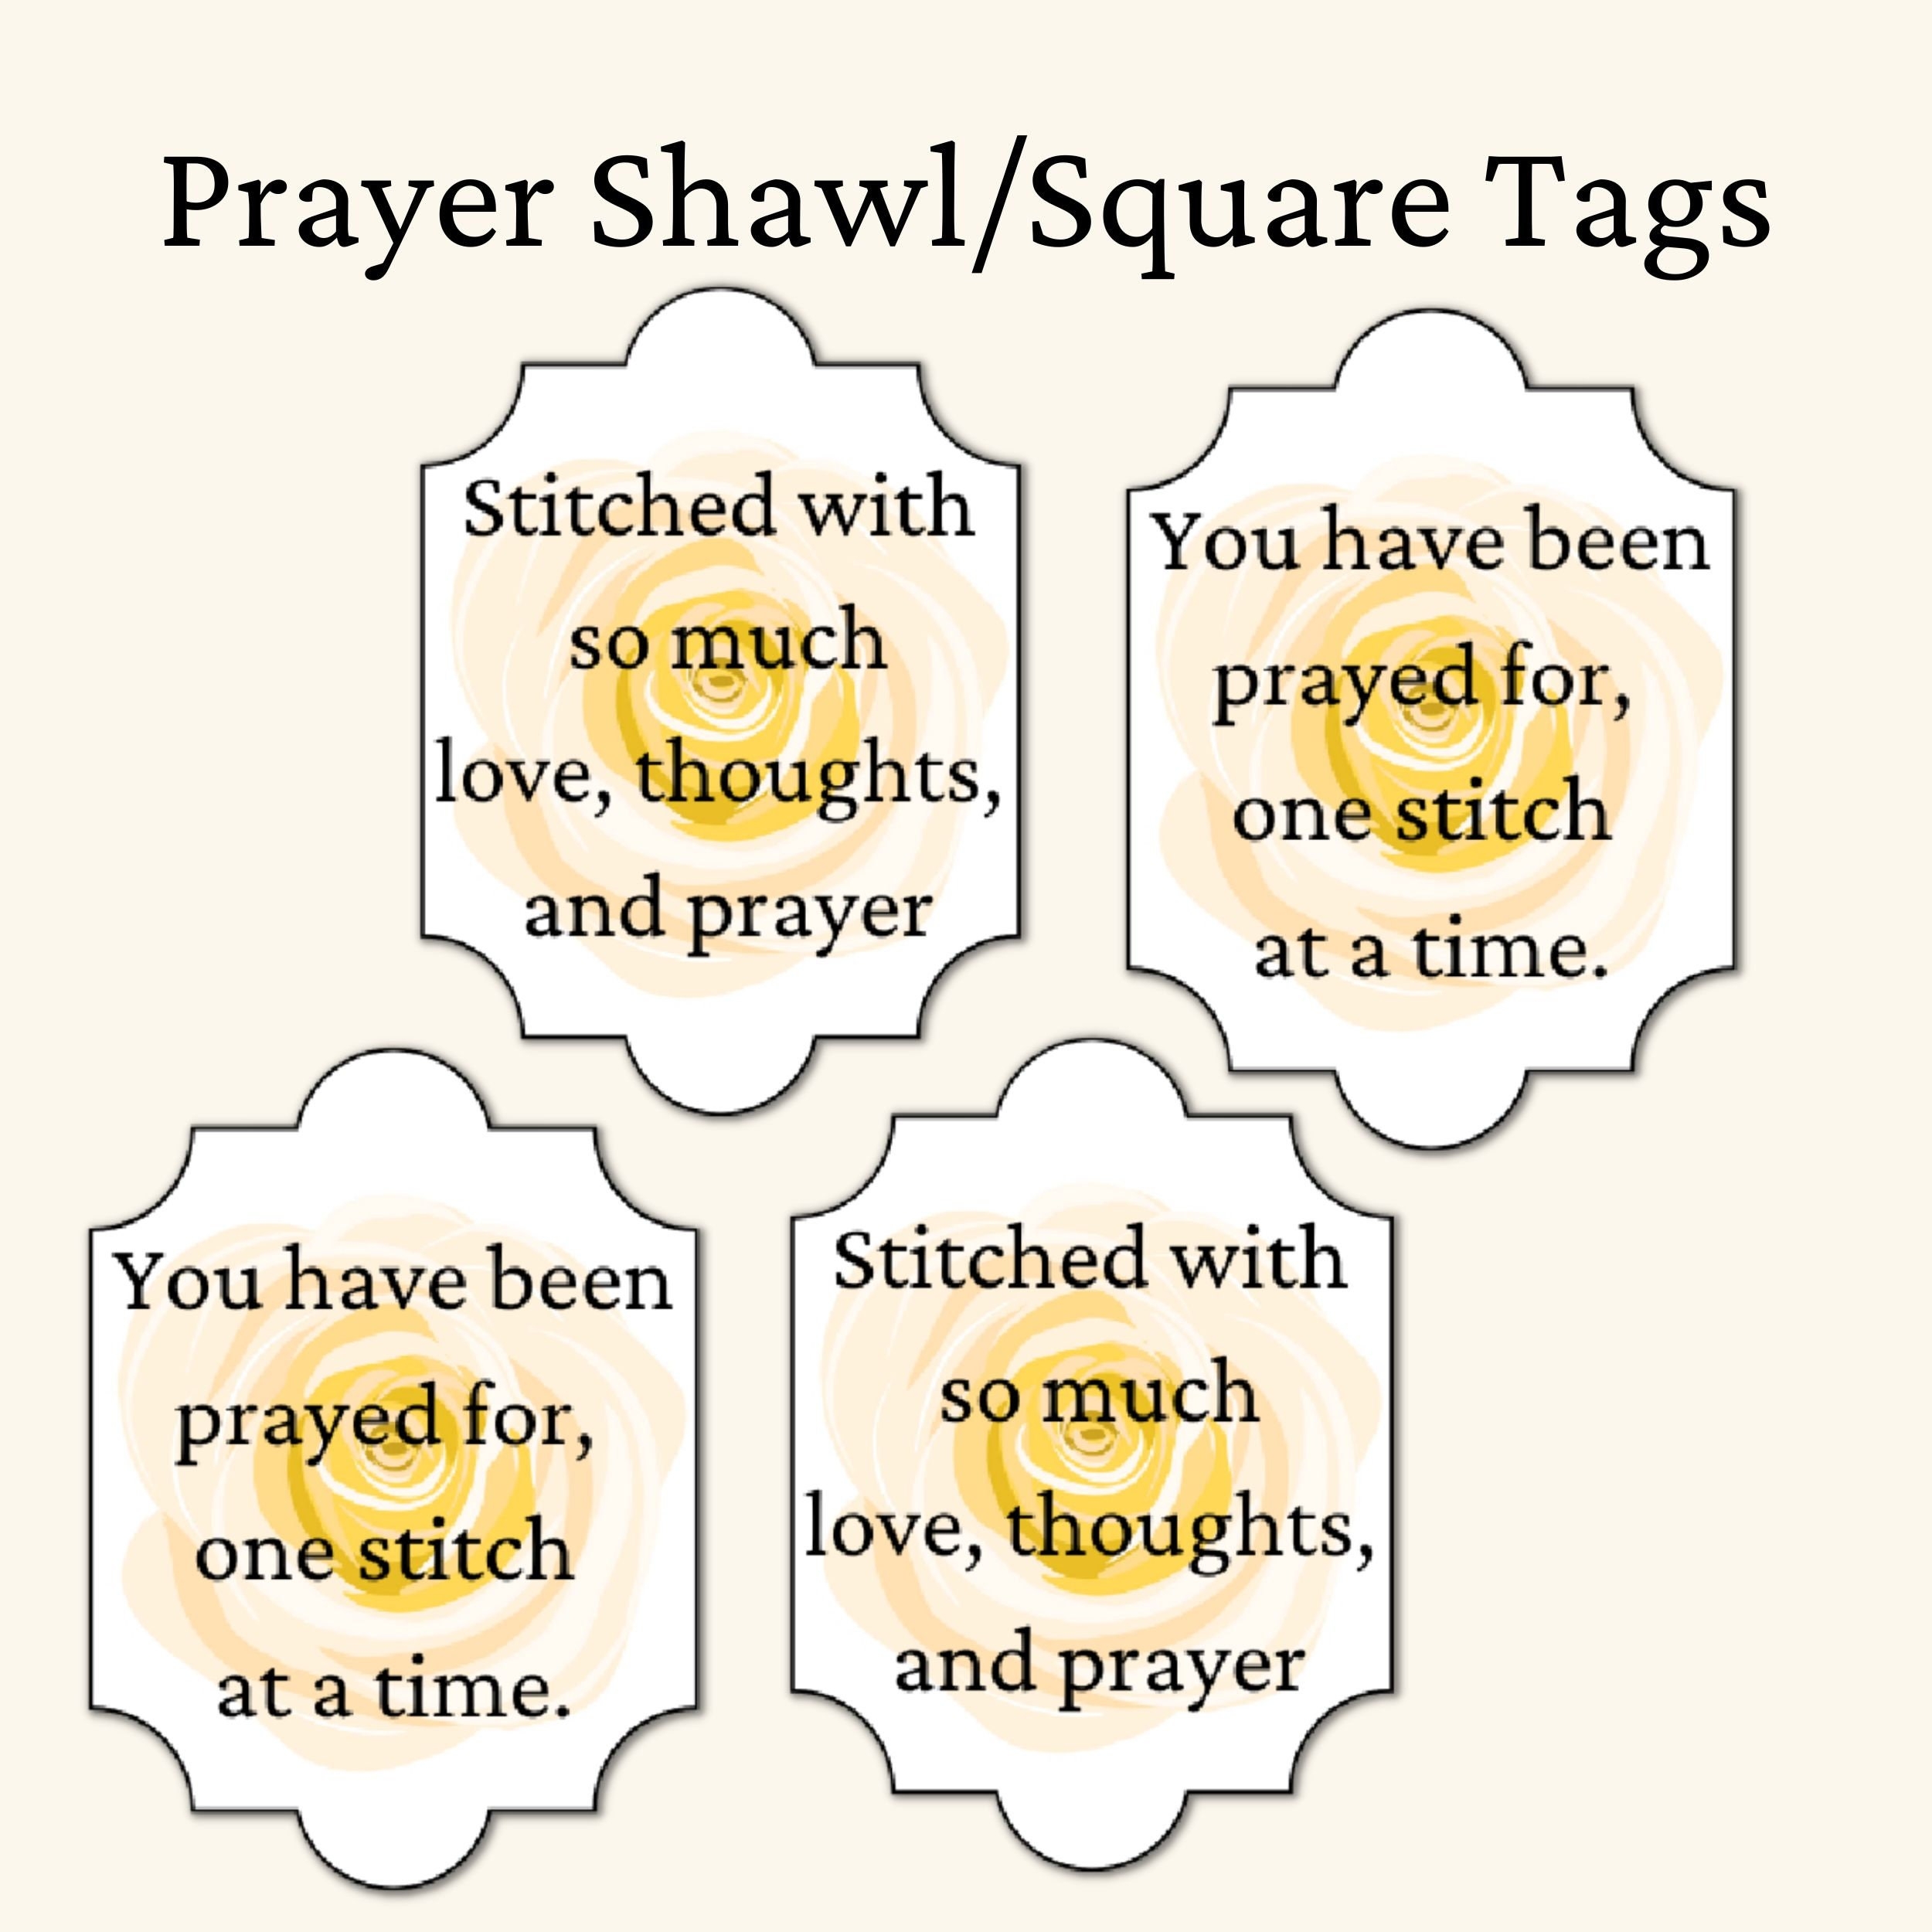 Stitched With Love Tags Prayer Shawl Tag Prayer Square Tag Tags For Crochet Tags For Knitting Prayer Tags Etsy Israel